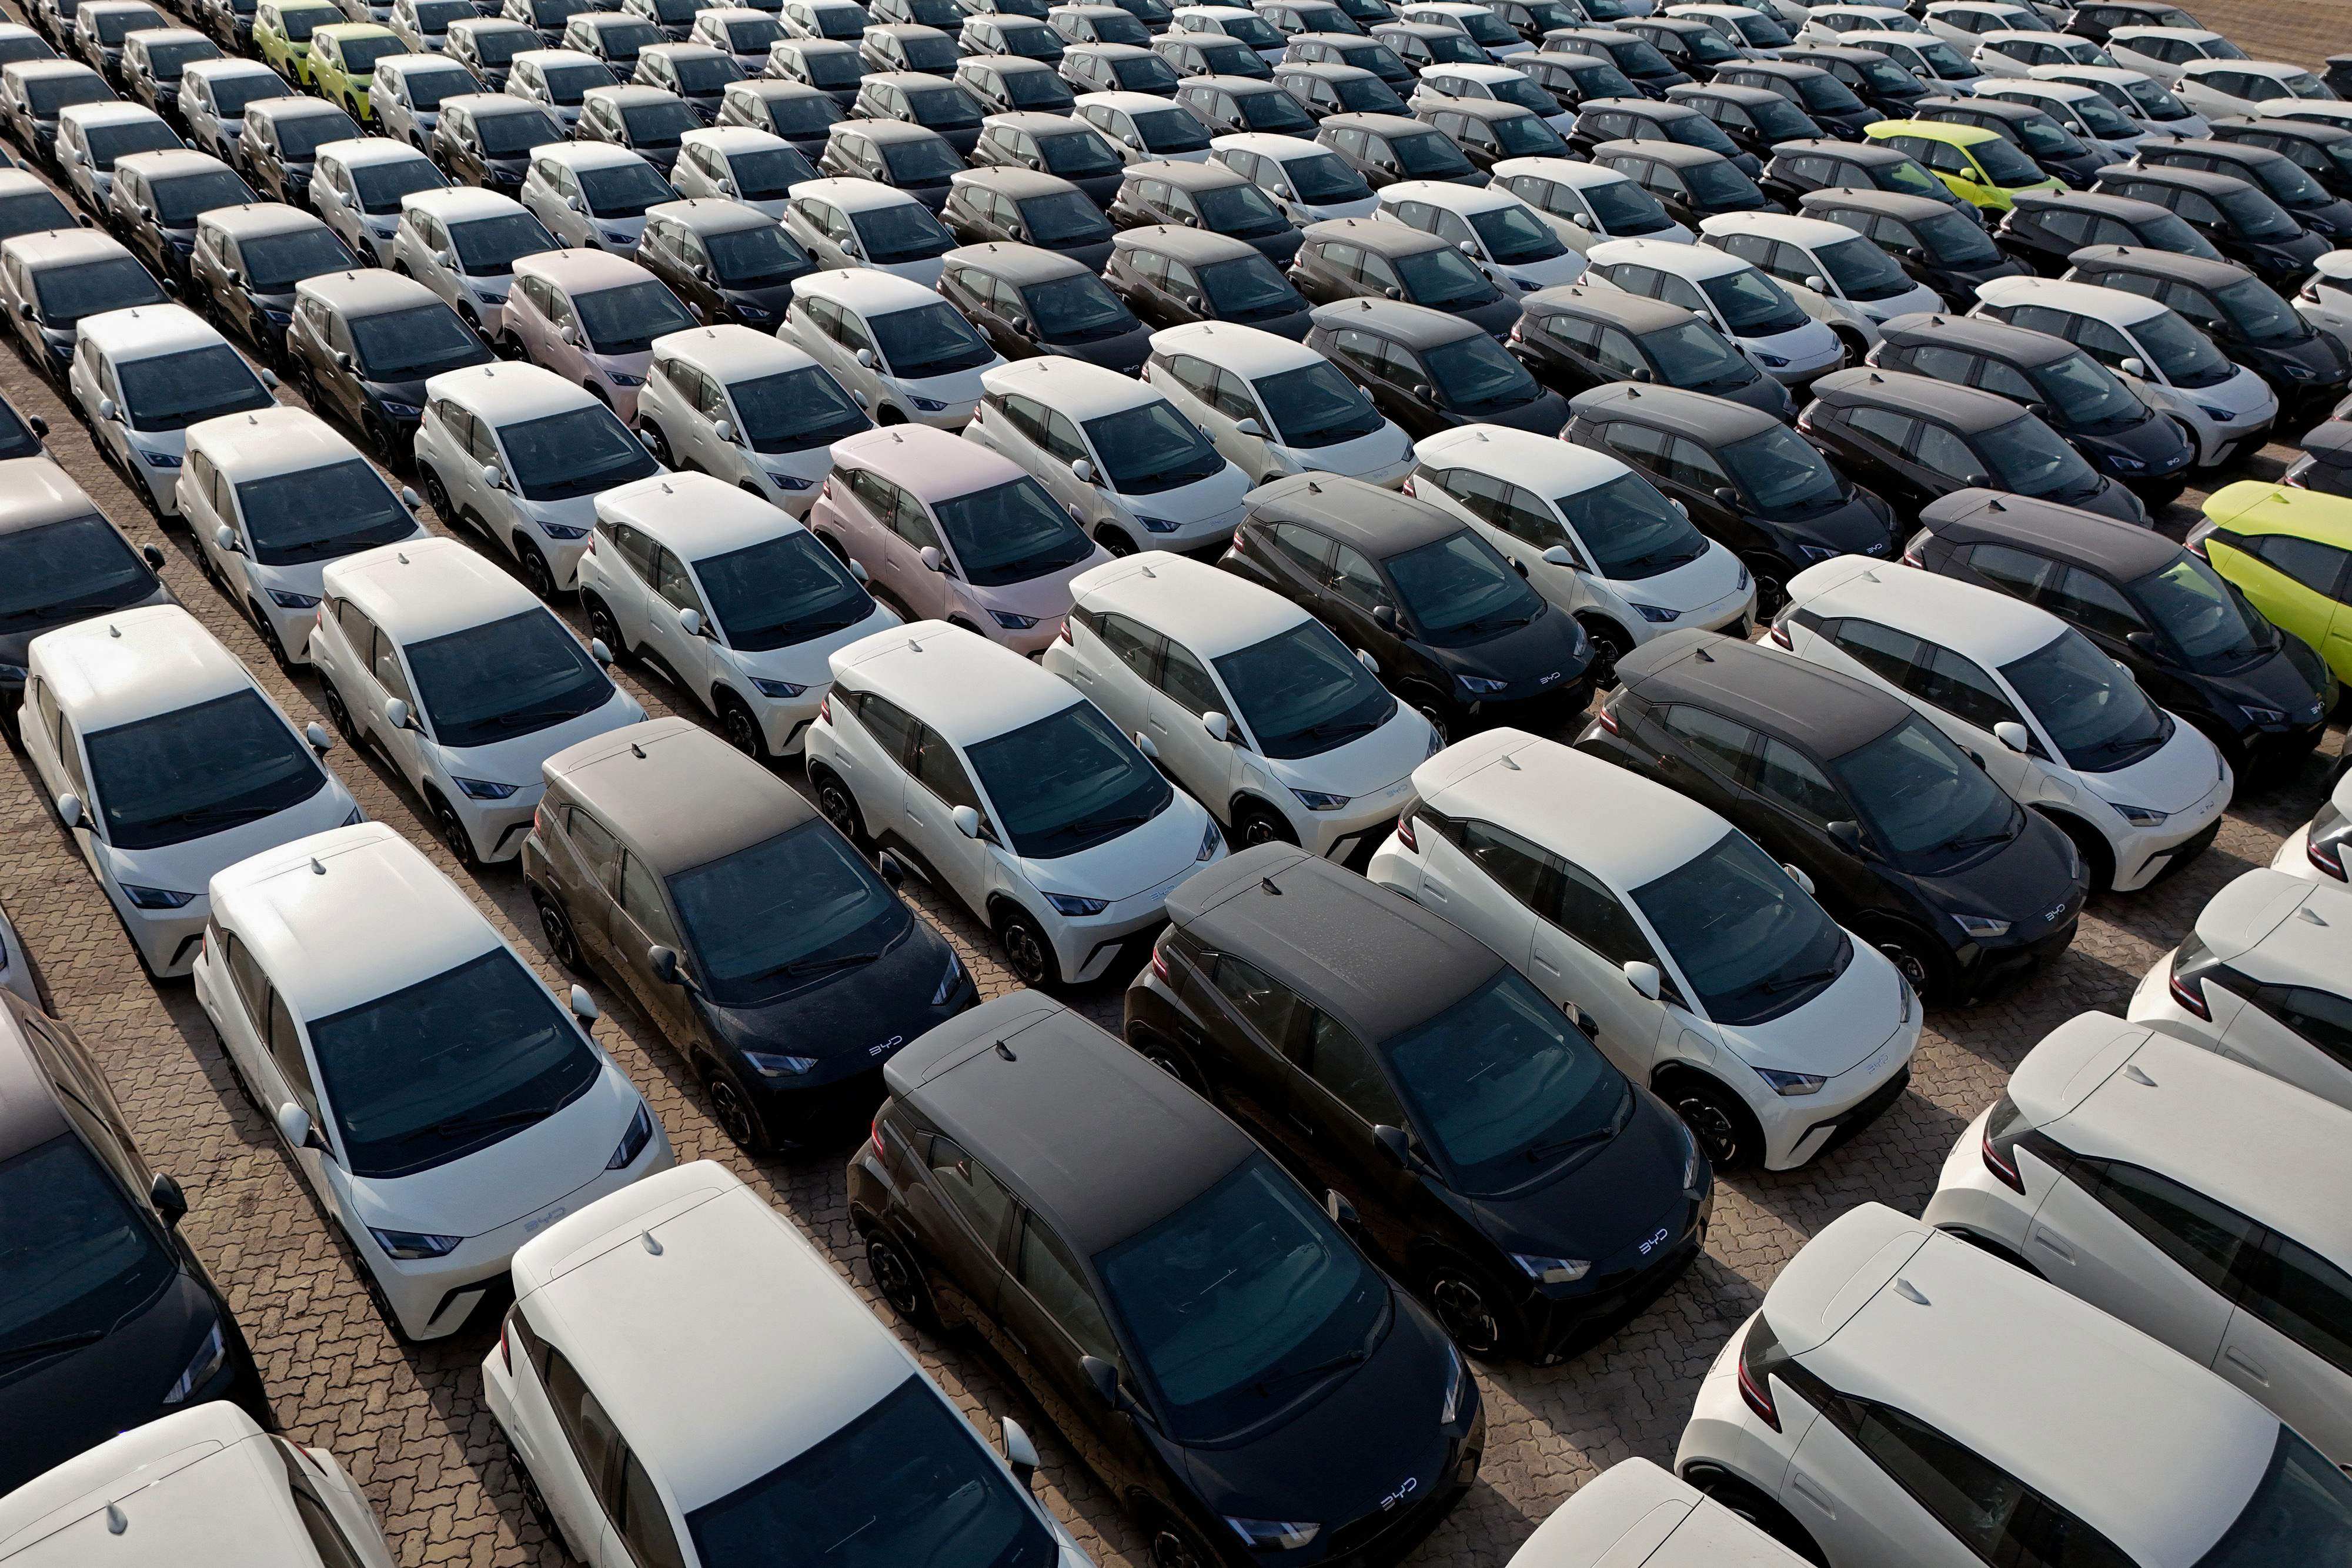 Export-bound BYD electric cars waiting to be loaded onto a ship at a port in Yantai in eastern Shandong province. Photo: AFP